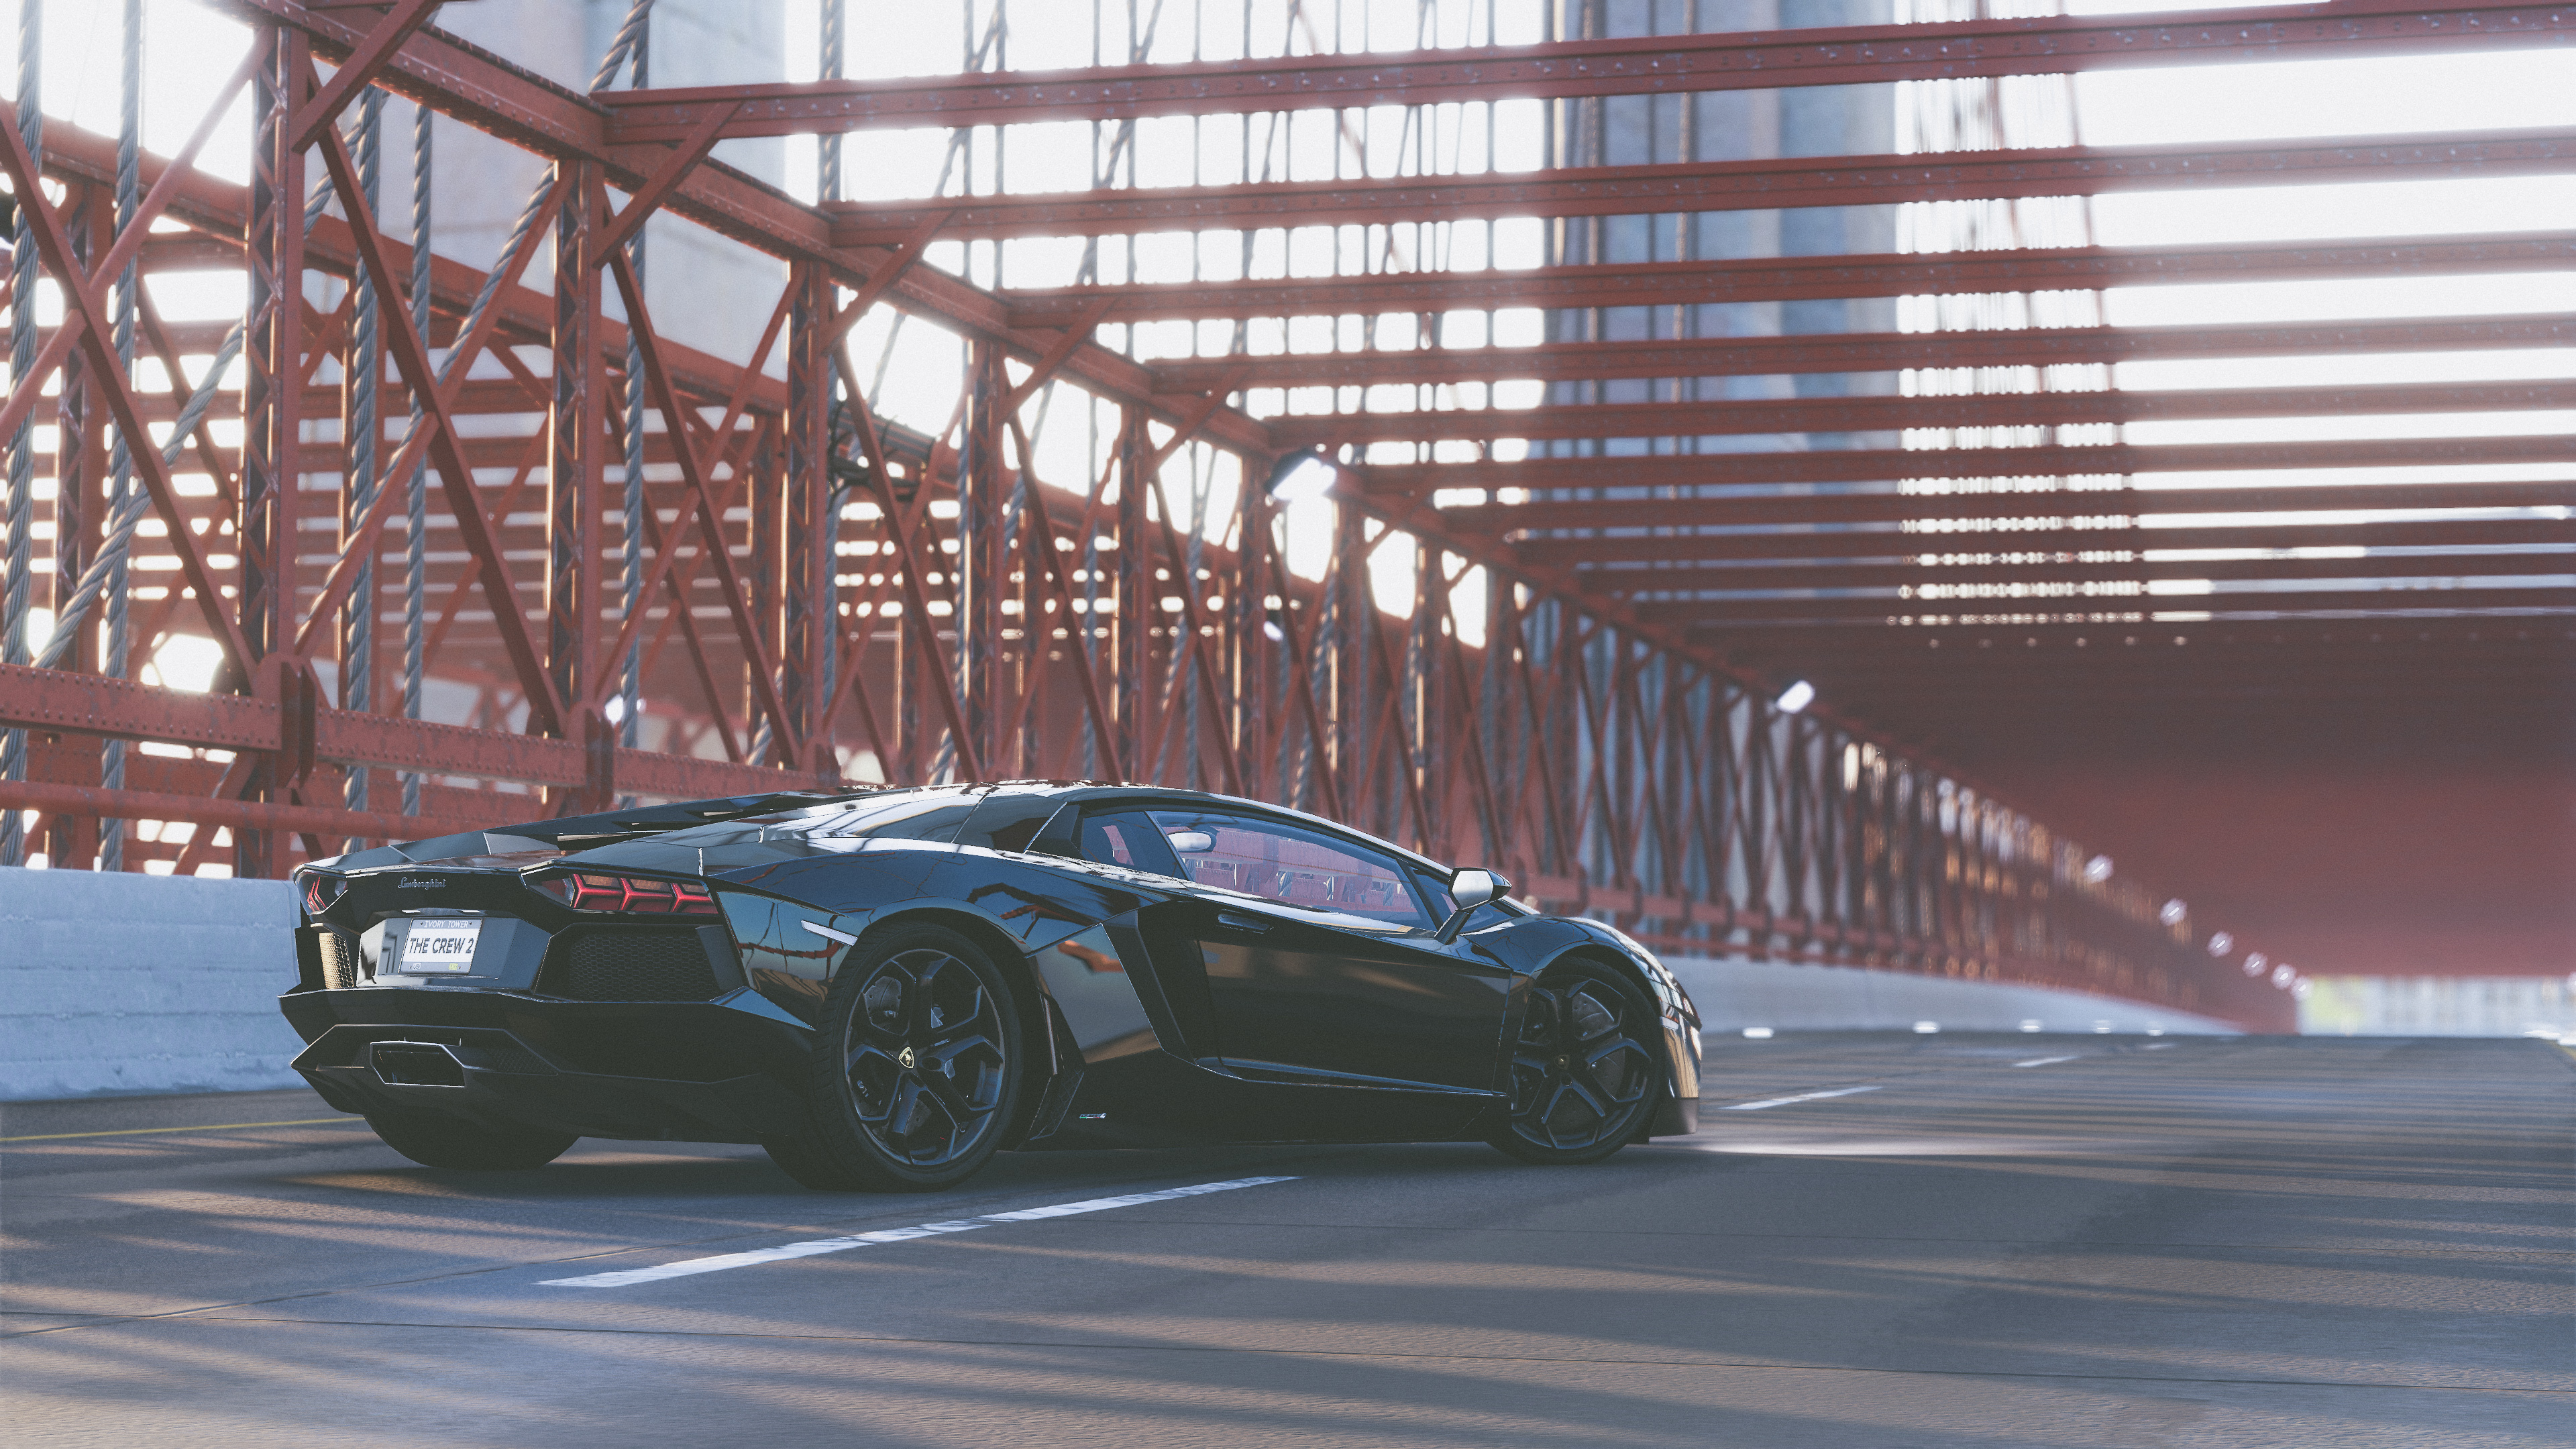 3840x2160 The Crew 2 Lamborghini Aventador 4k 4k Hd 4k Wallpapers Images Backgrounds Photos And Pictures